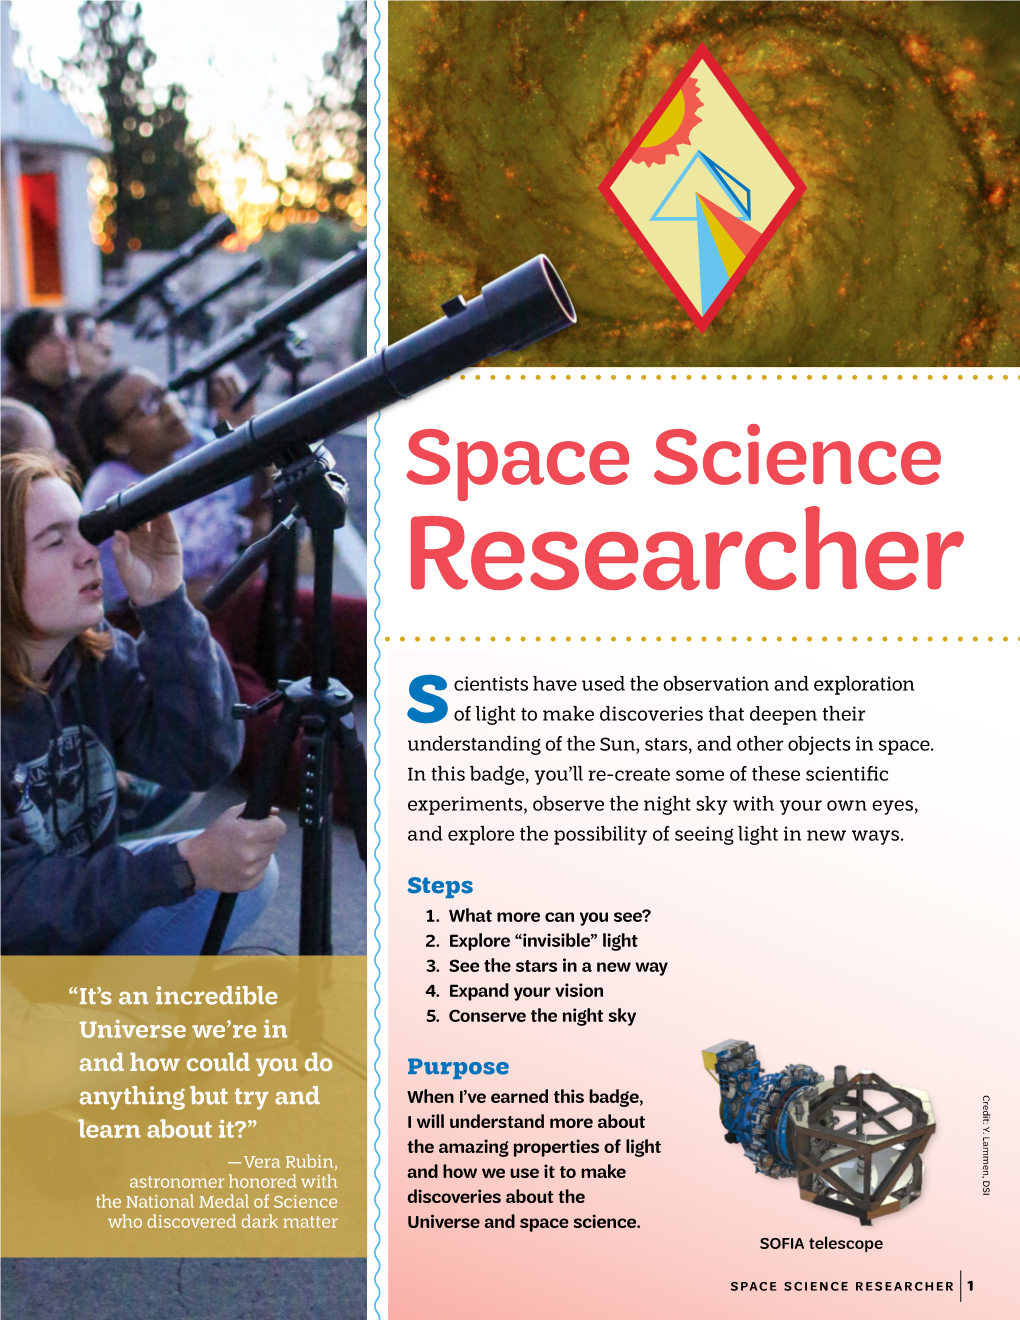 Space Science Researcher